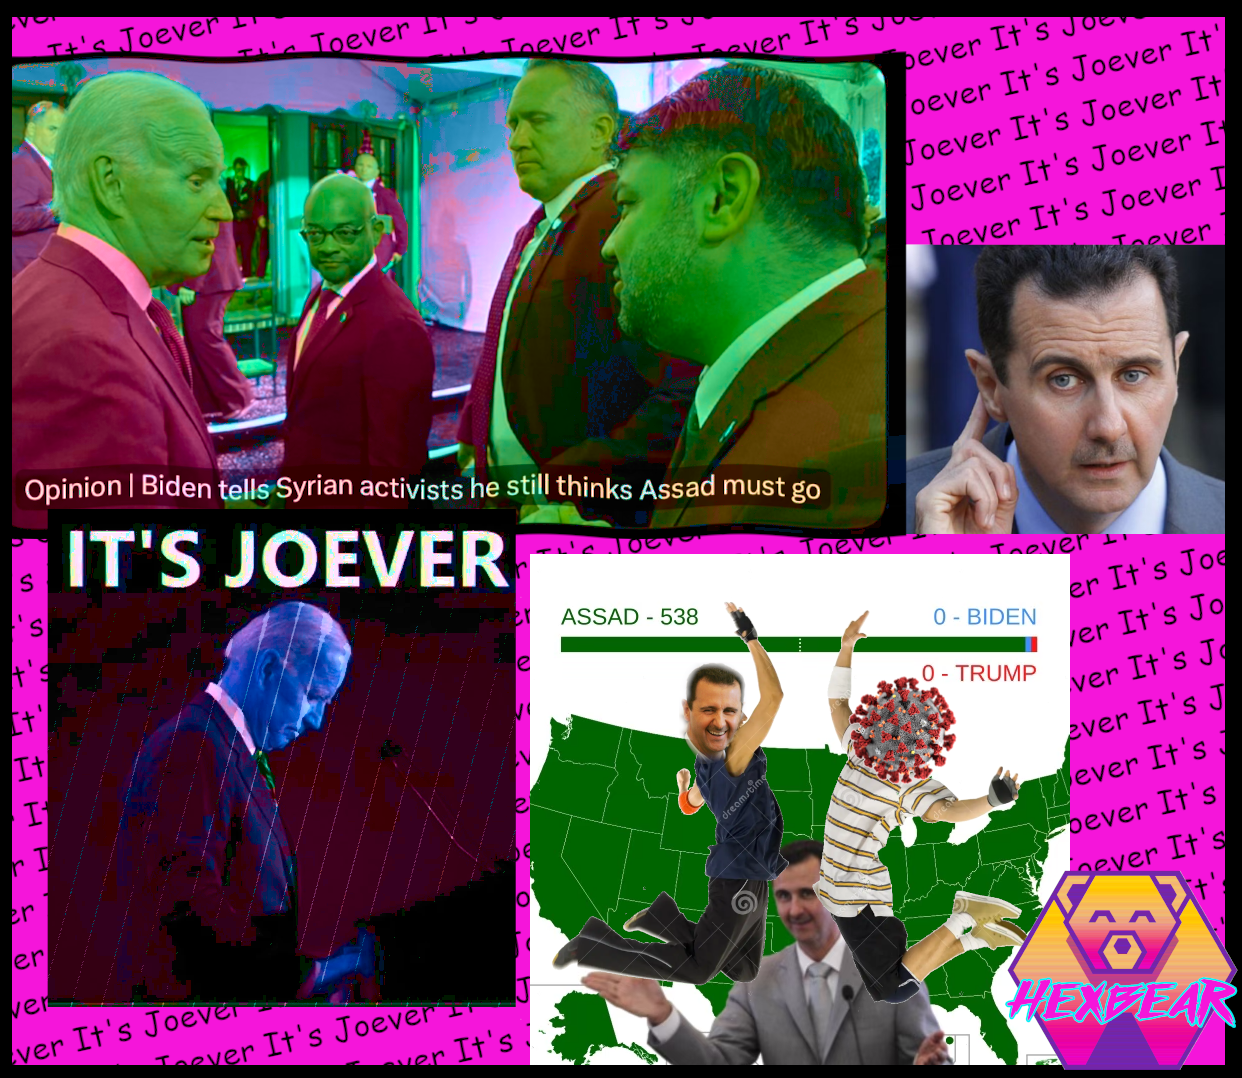 Going from top left to bottom right; An image of biden consulting with several men. The caption says "Opinion,  Biden tells Syrian activists he still thinks assad must go". The colors have been distorted to a sickly shade and the image has been manipulated with an unsettling wave. Image: Assad holding his ear to listen attently. Image: Biden looking pained, staring down at his lectern. Above his head the words "IT'S JOEVER" are prominently displayed. The colors have been distorted to look sad and oppressive. Image: Two chads, their heads replaced with a smiling assad and a coronavirus particle, are doing a jumping high five. Behind them a smiling Assad stands in front of an electoral map of the US showing Assad with 538 electoral college votes and Trump and Biden with 0. There is a hexbear logo in the bottom right. The background is an offensively bright shade of pink with the words "It's Joever" repeated over and over and over again, canted at an angle